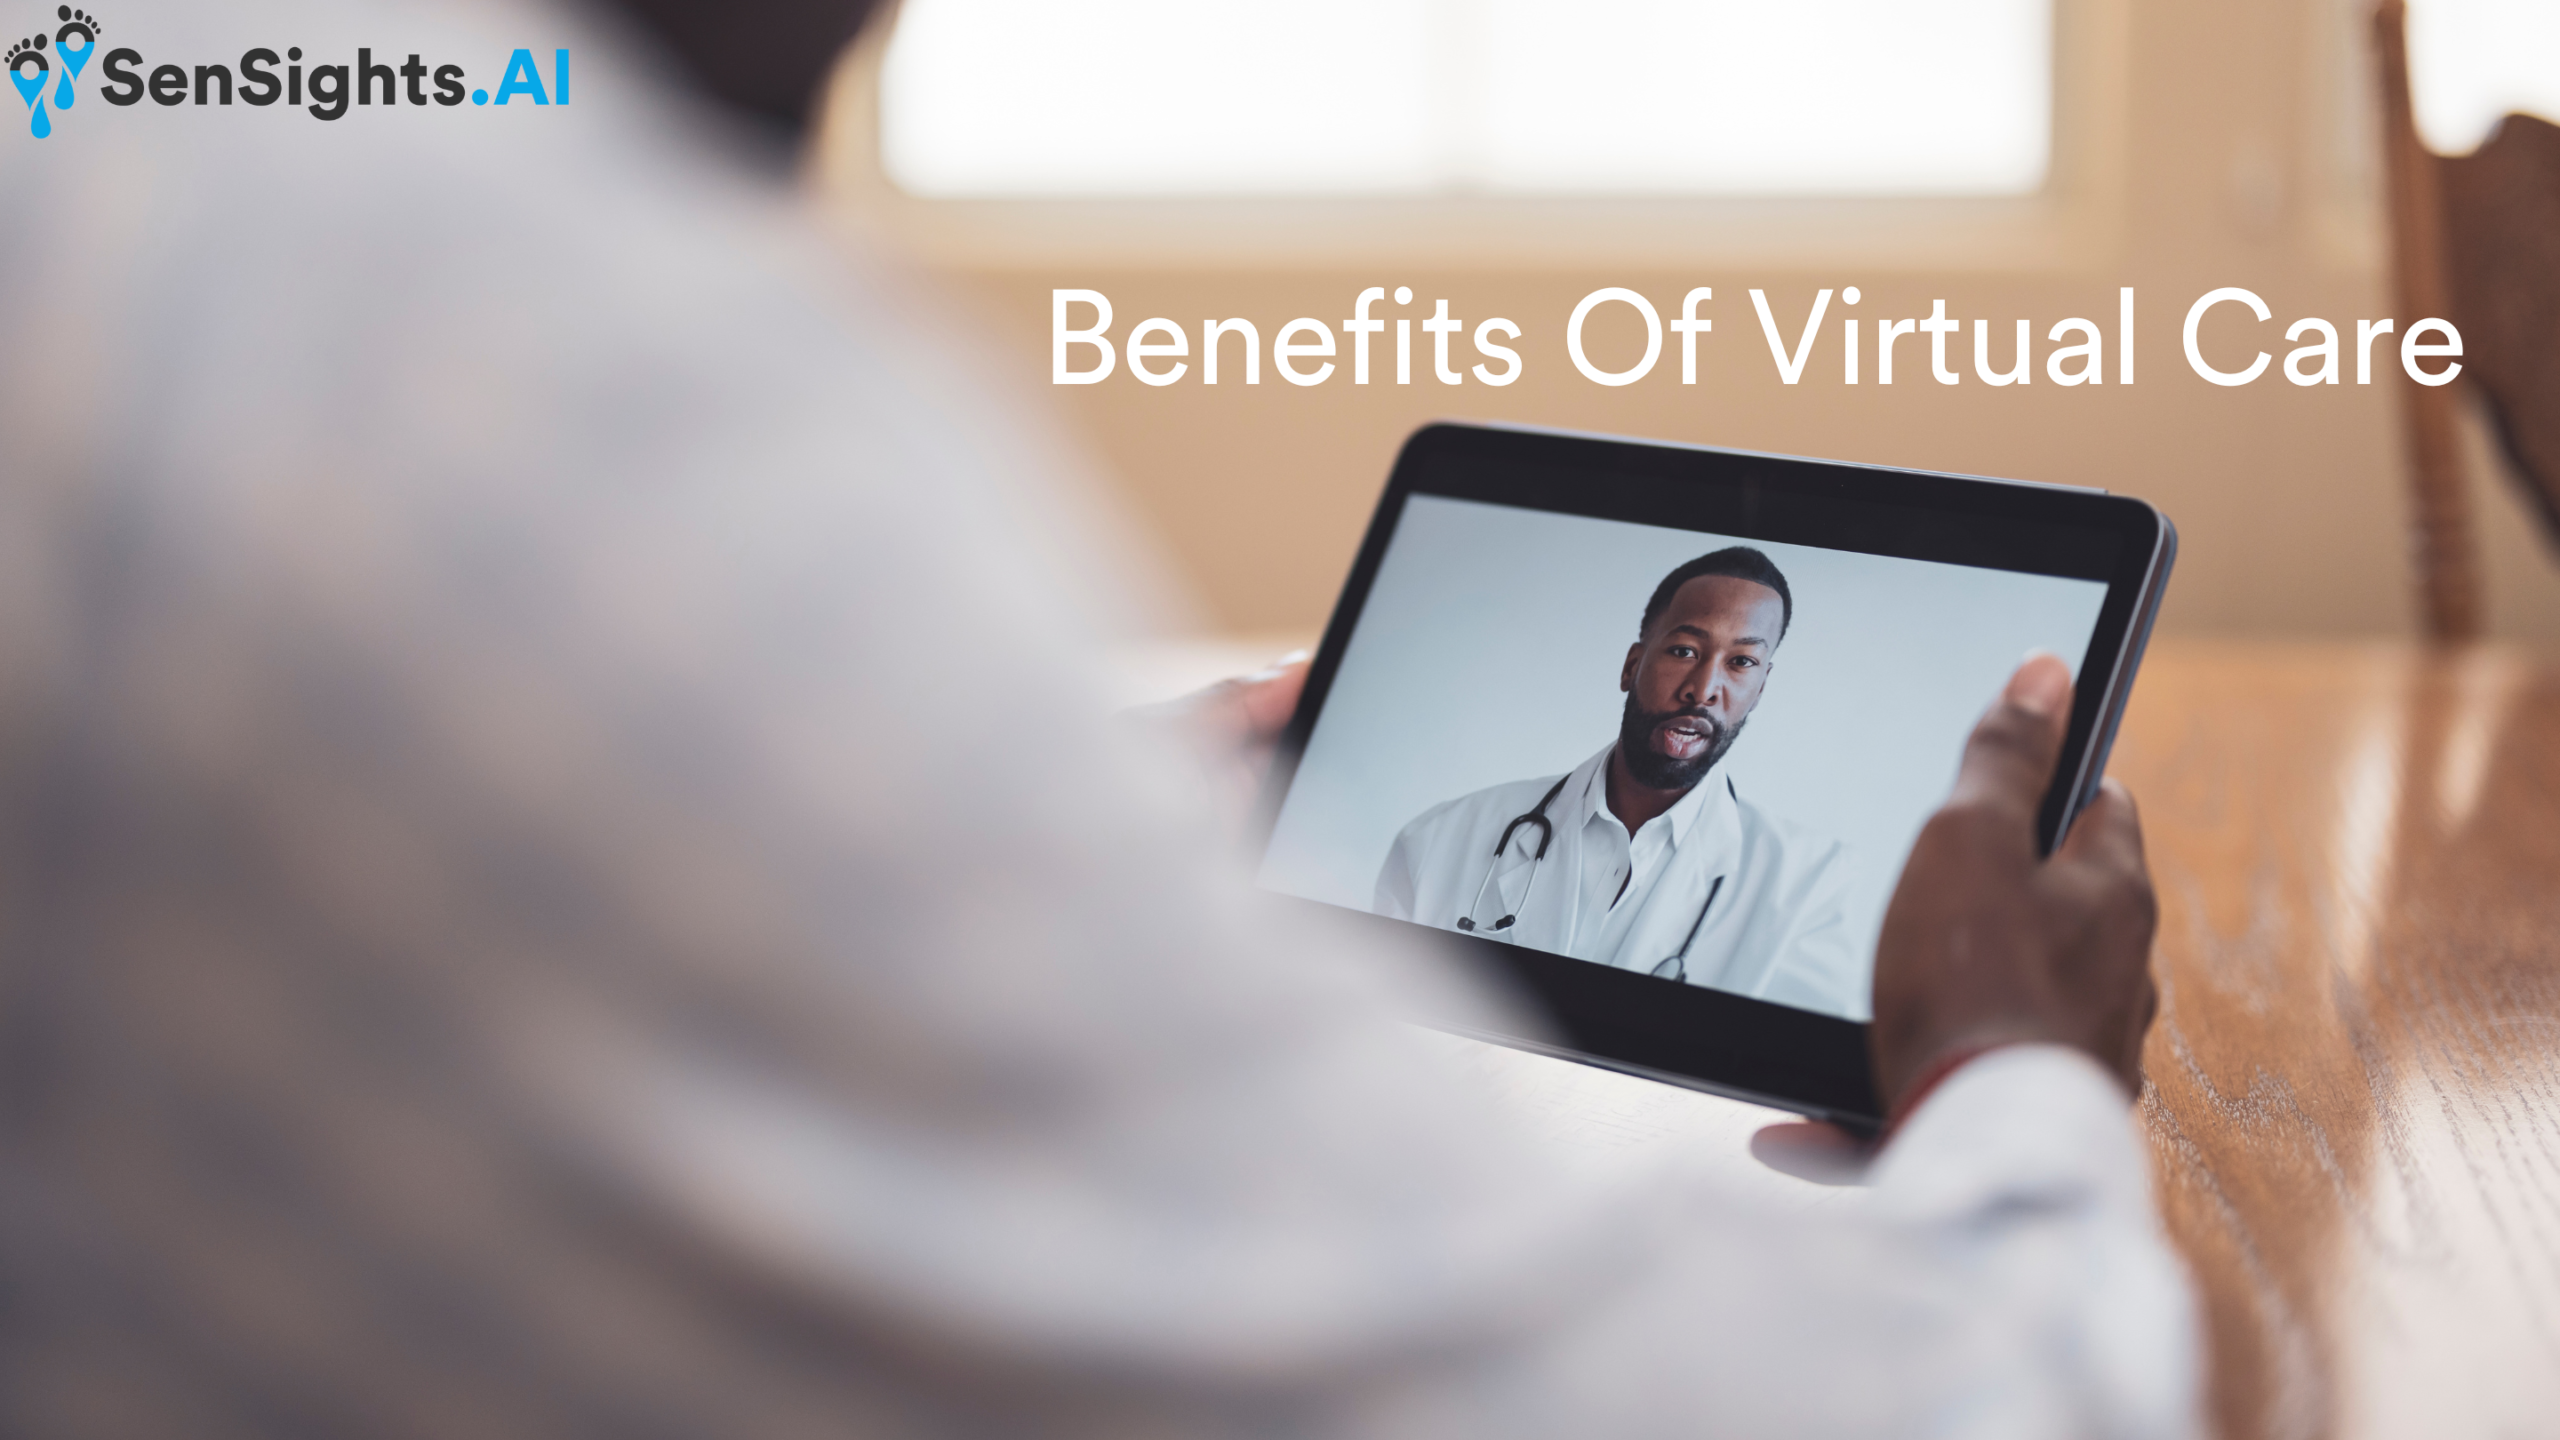 The Benefits of Virtual Care: Why It’s Becoming More Popular